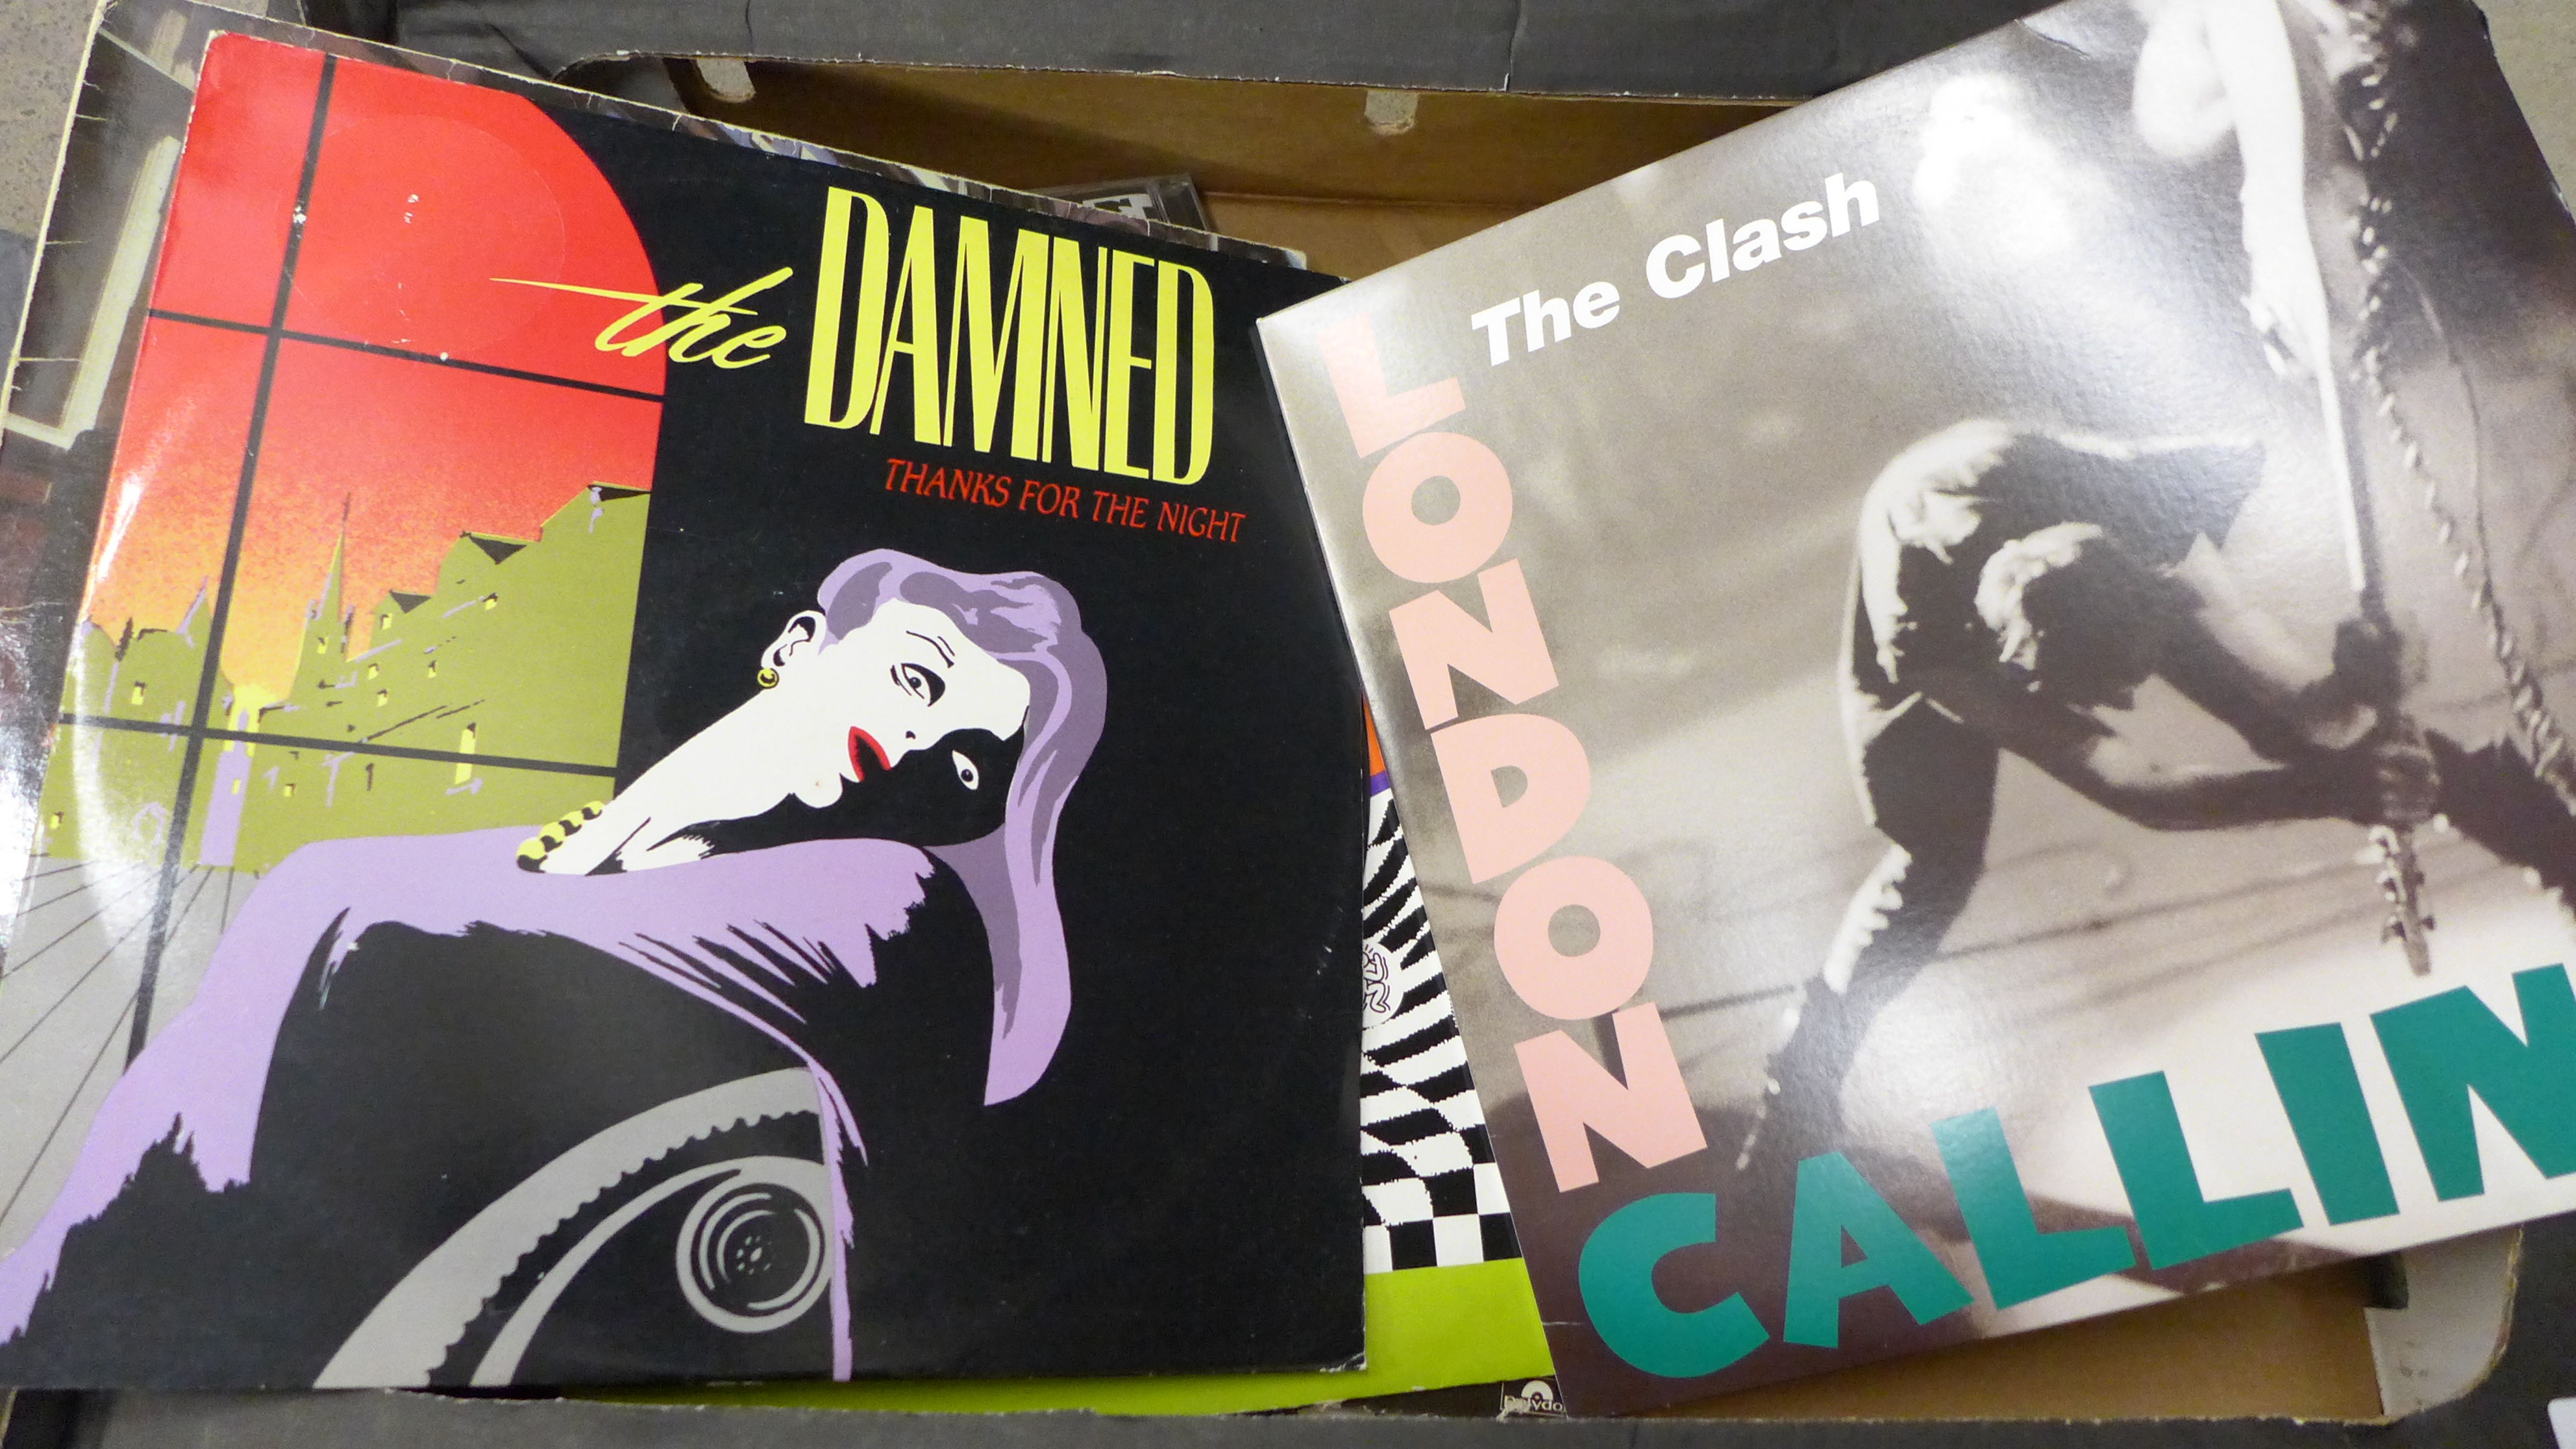 1970s/80s alternative music LP records and CDs, The Clash, Specials, The Jam, The Damned, Madness, - Bild 4 aus 4